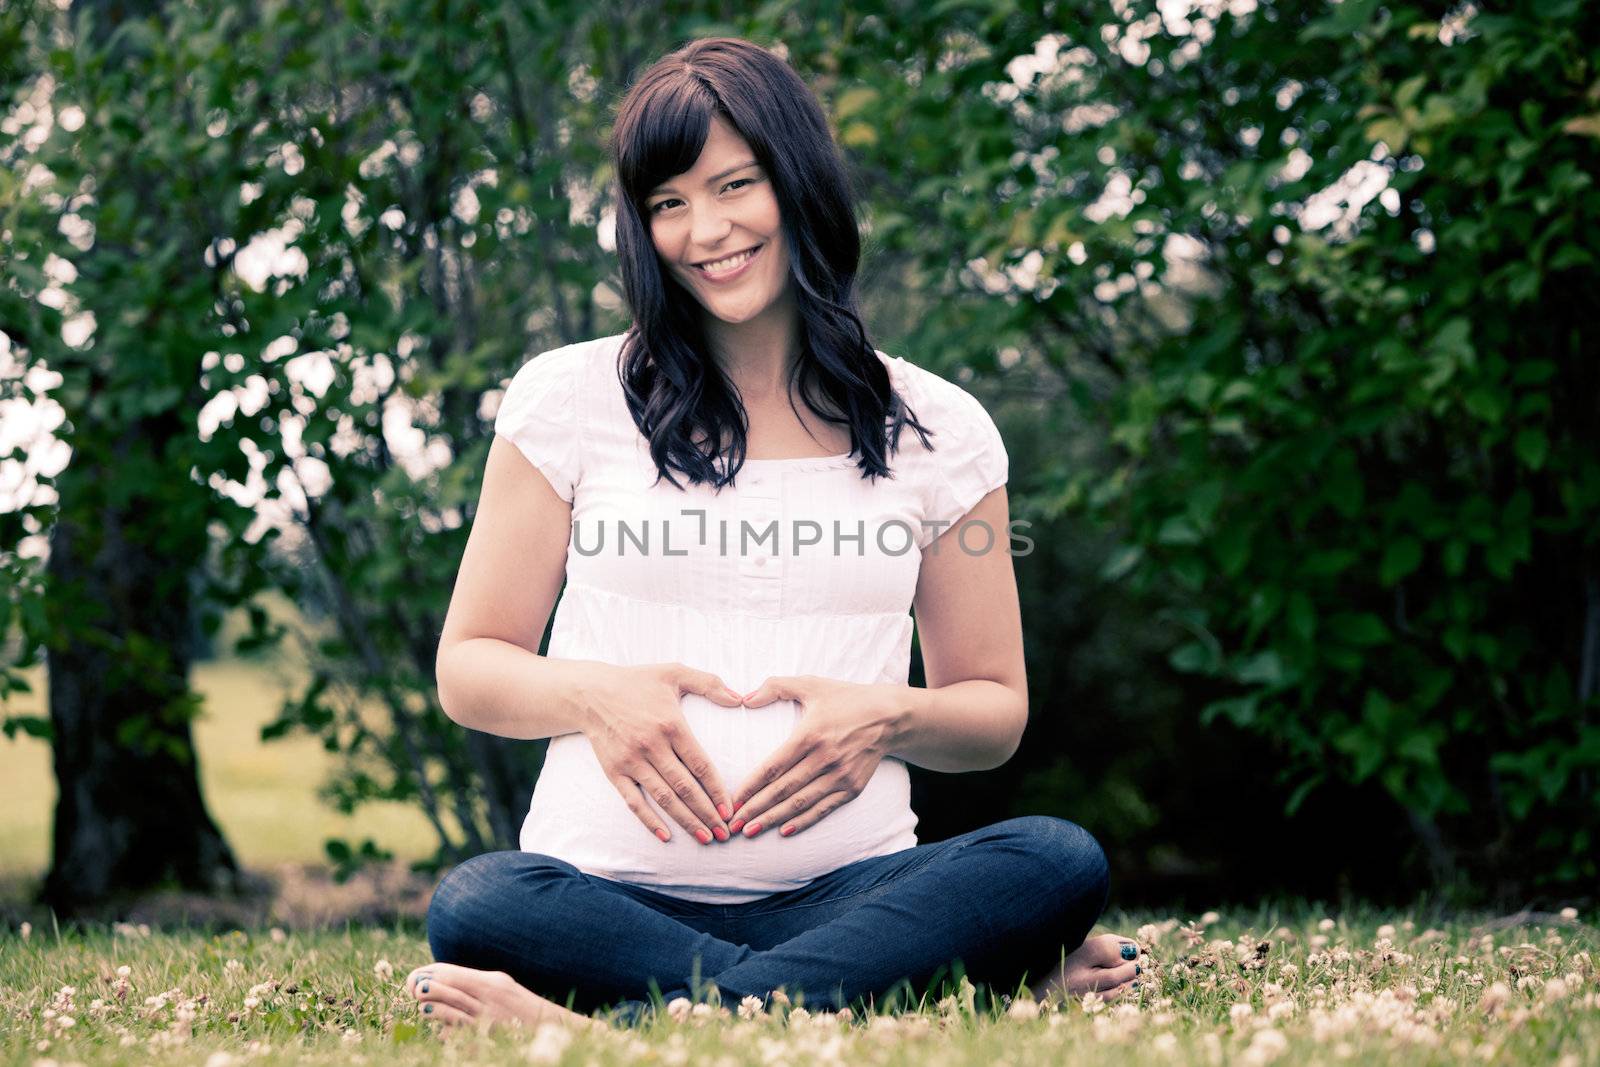 Portrait of a happy young pregnant woman in her third trimester - image has a cross processed style